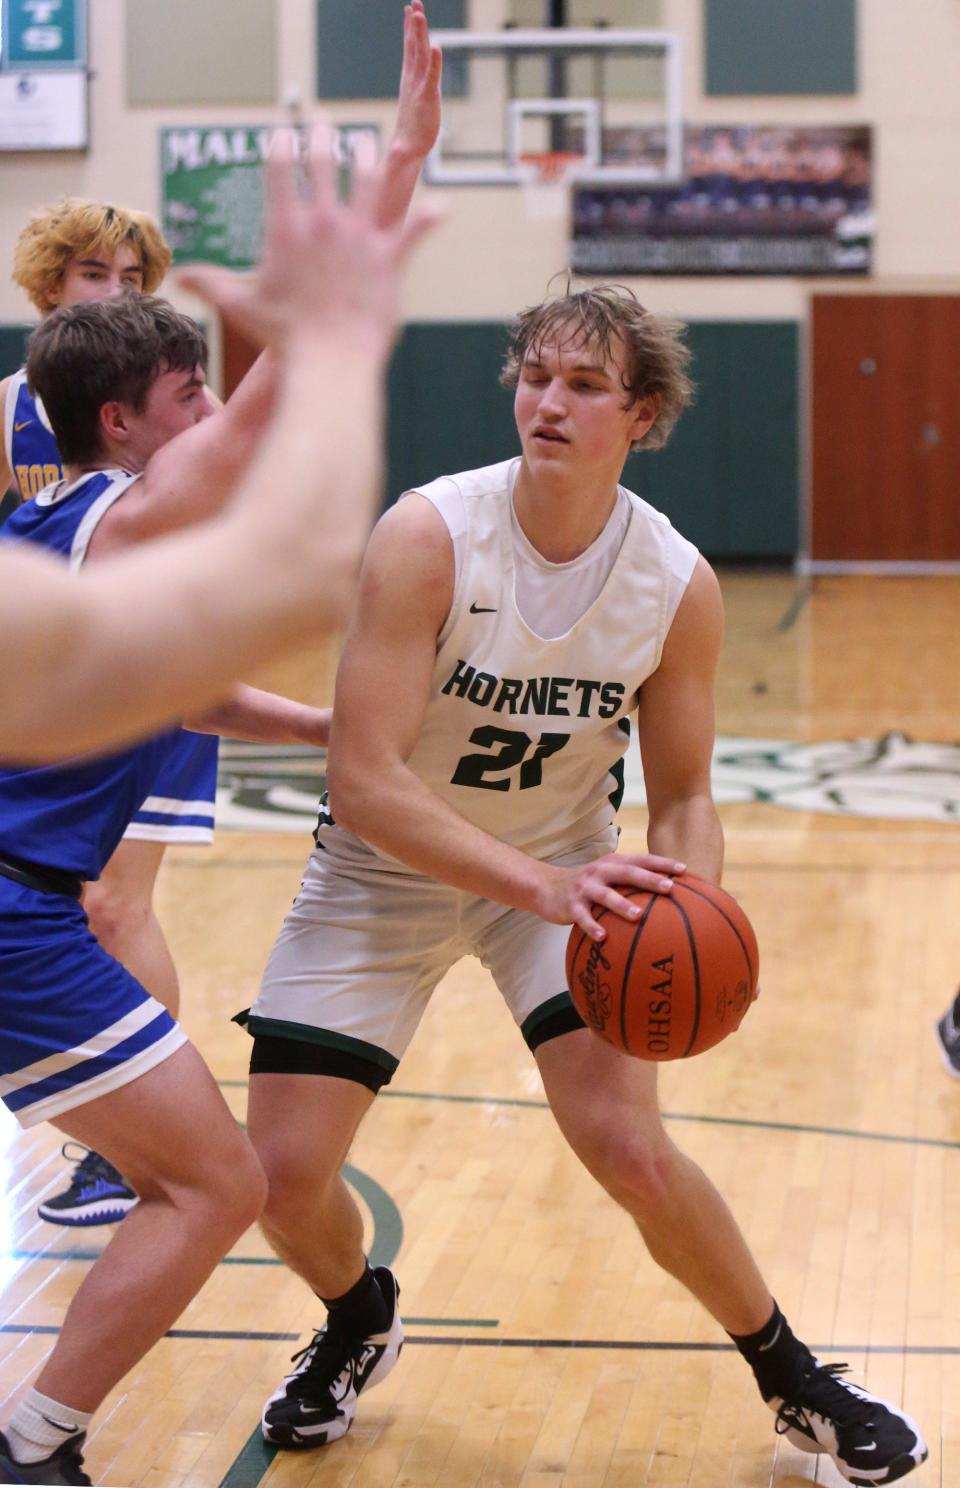 Michael Minor, 21, of Malvern looks for an opening during their game against East Canton at Malvern on Friday, Jan. 28, 2022.